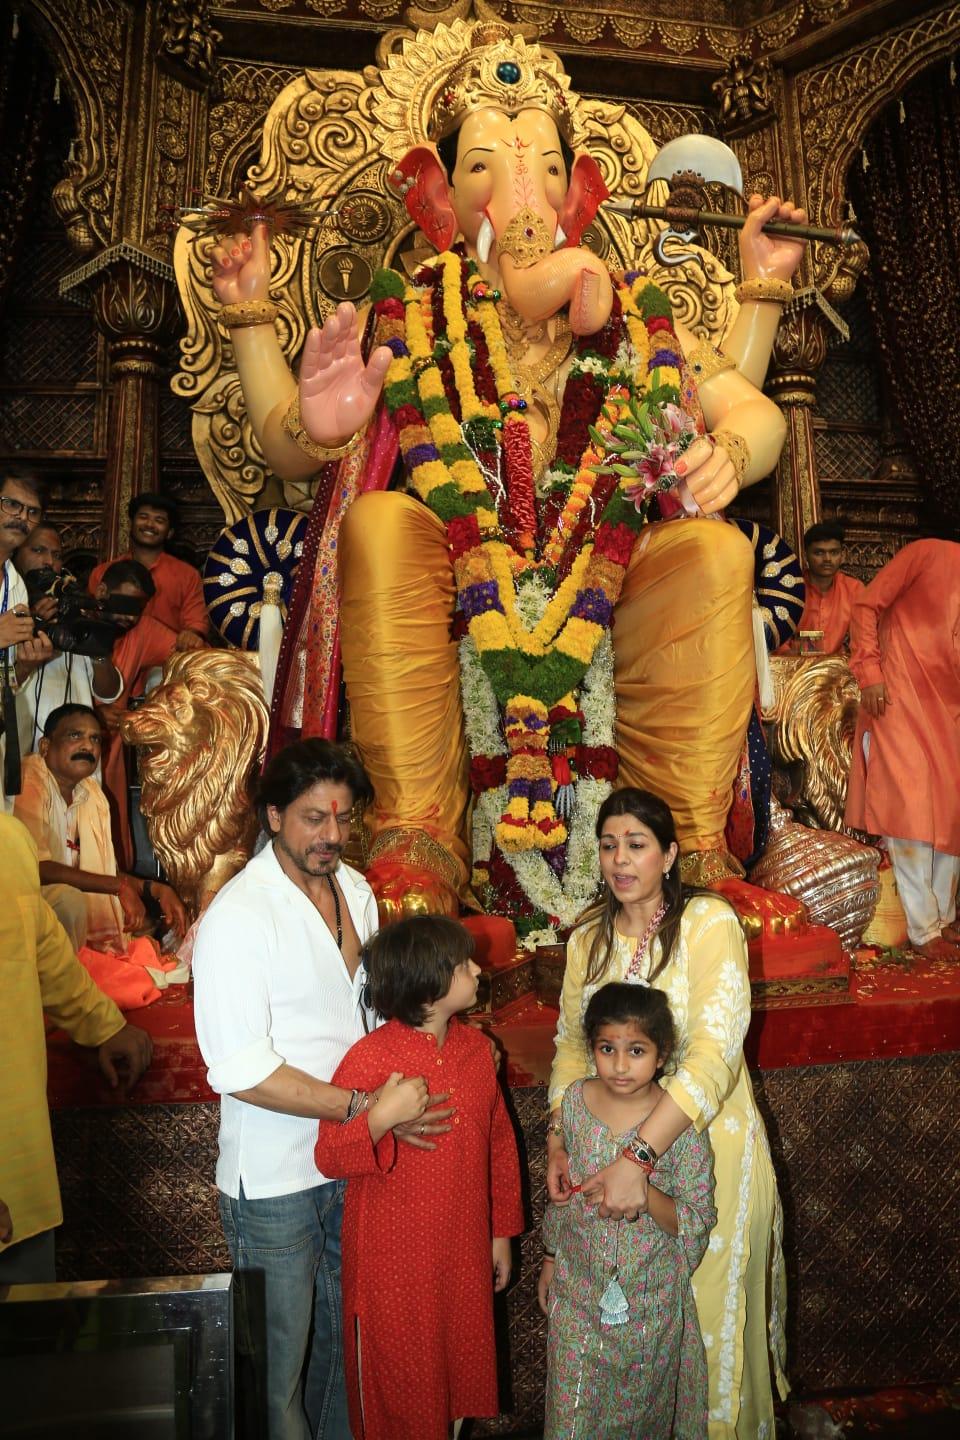 On Thursday evening, superstar Shah Rukh Khan was seen arriving at Lalbaughcha Raja along with his youngest son AbRam and his manager Pooja Dadlani. 